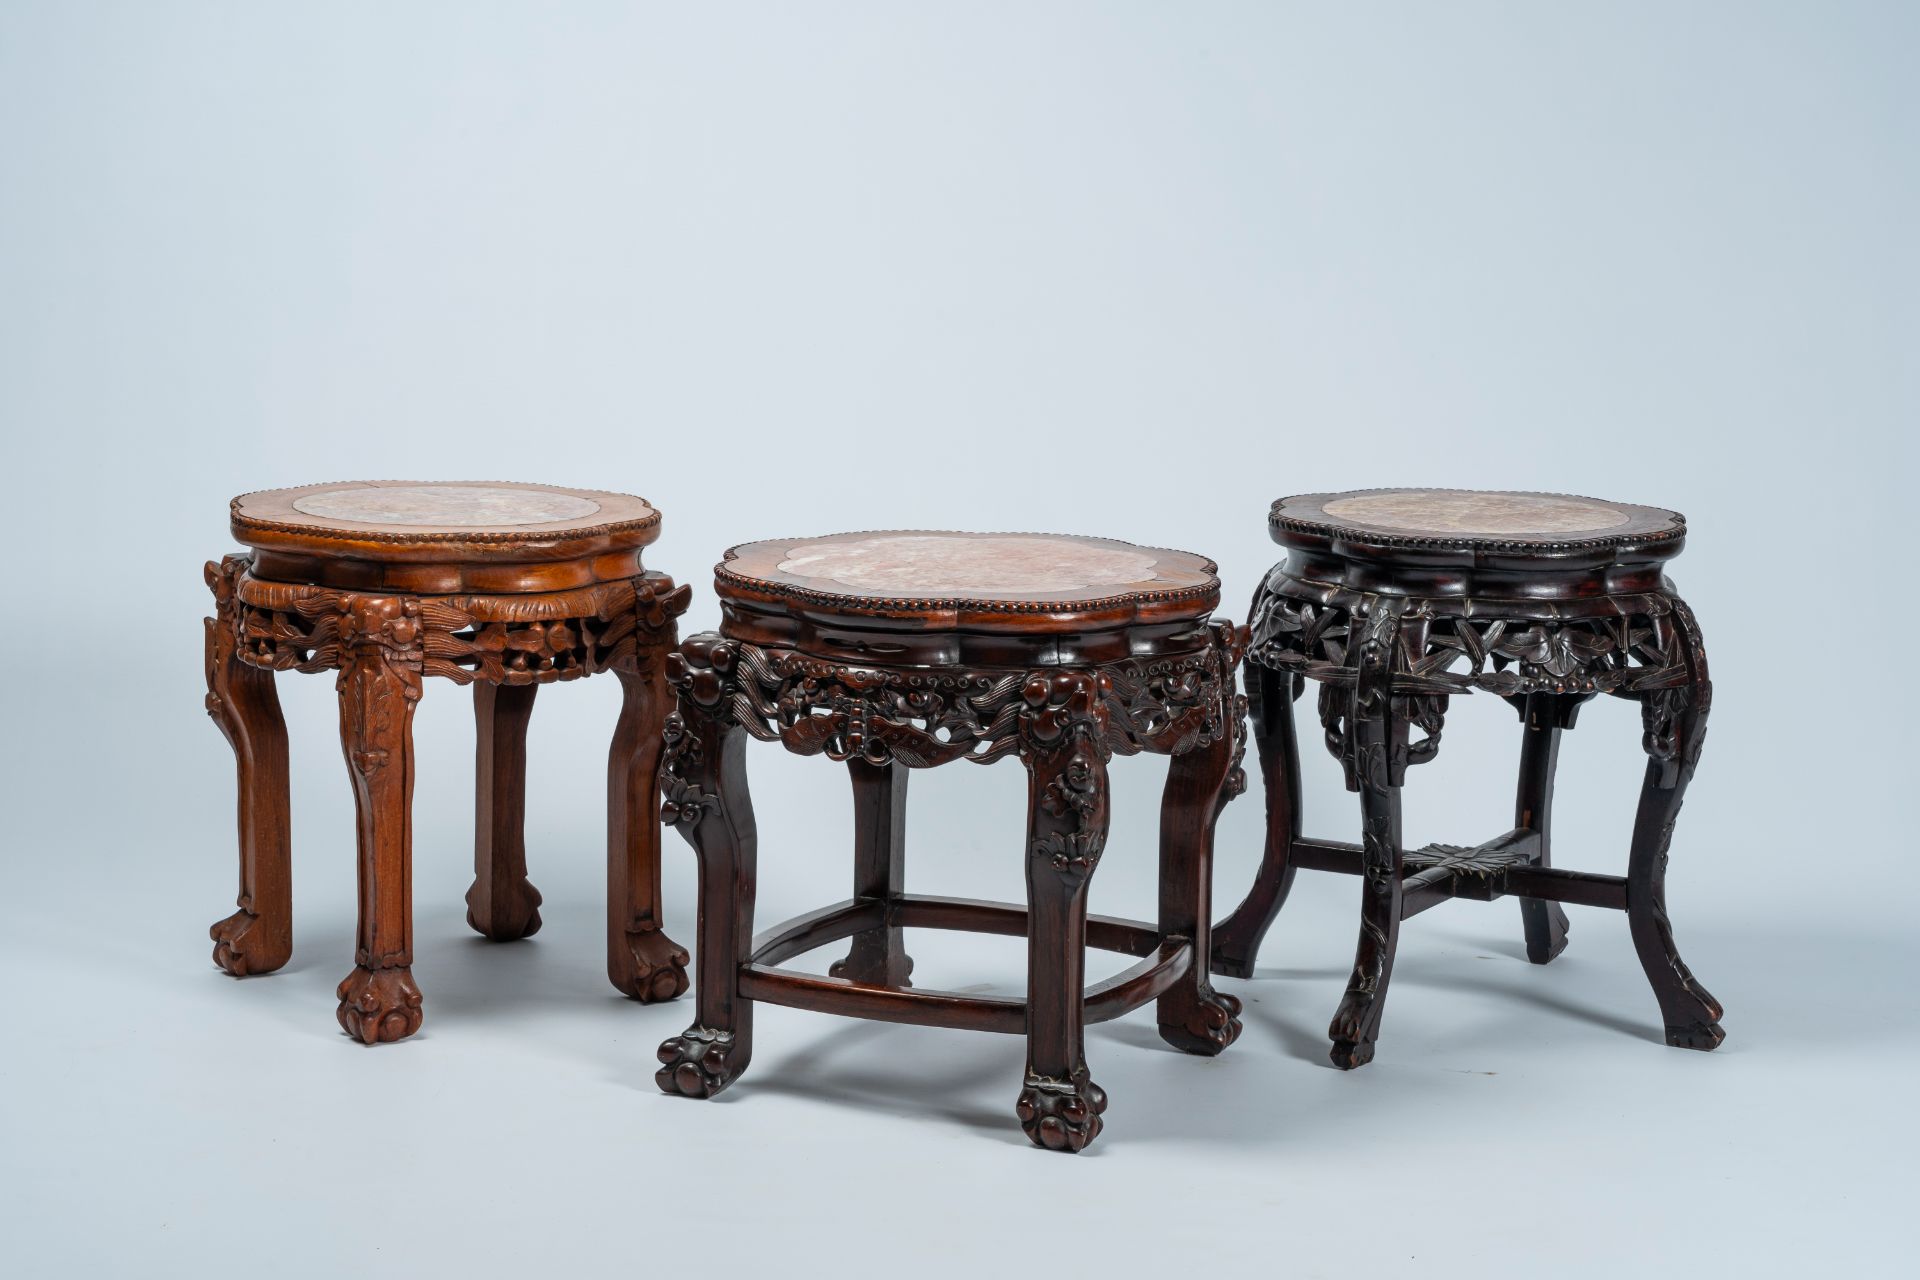 Three Chinese open worked lobed carved wood stands with marble top, 19th/20th C.